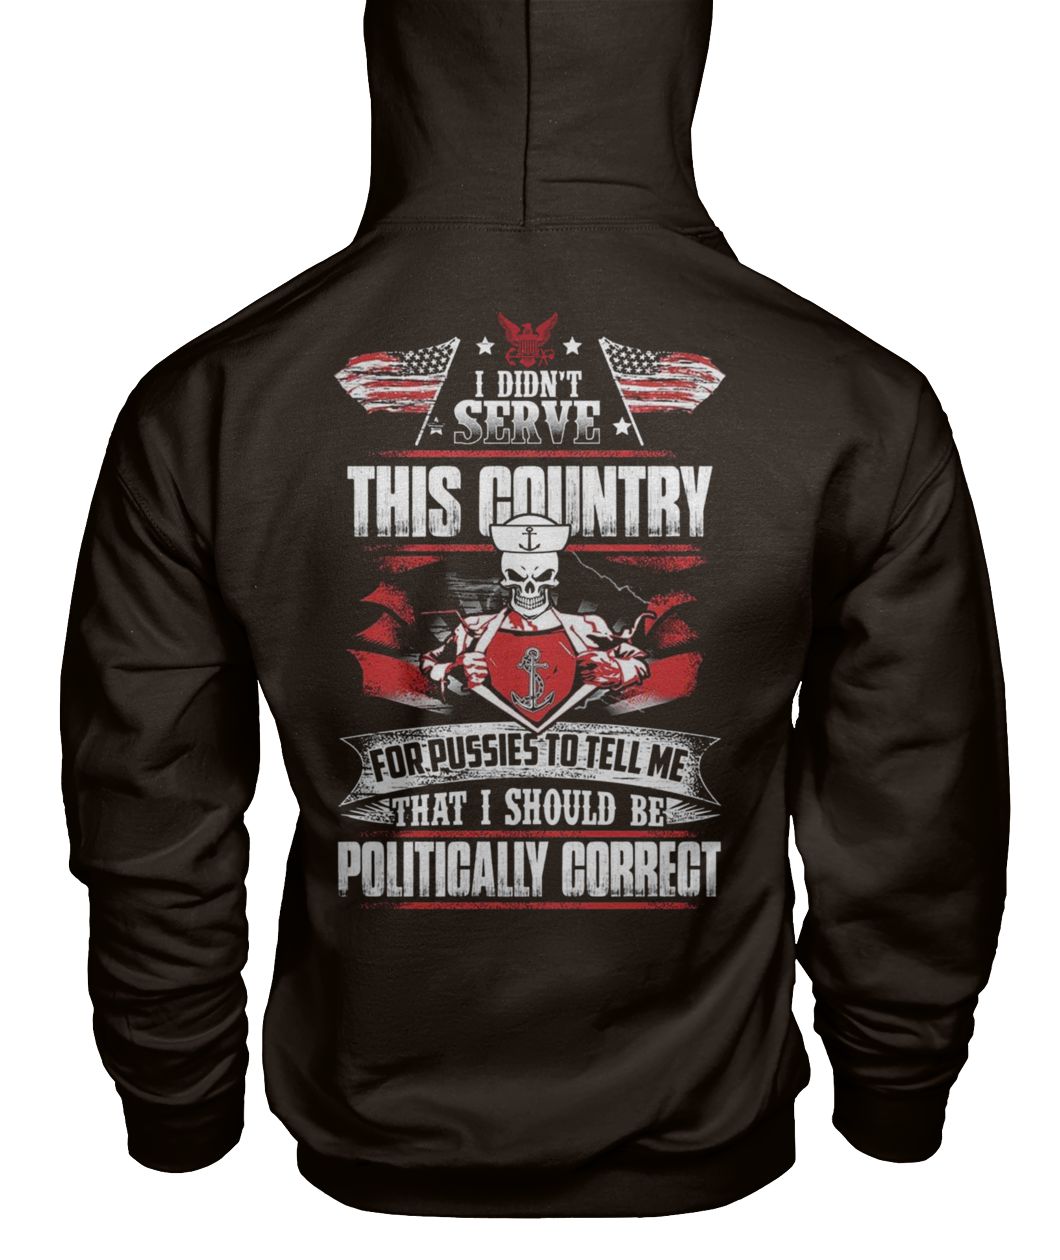 I didn't serve this country for pussies to tell me that I should be politically correct navy veteran gildan hoodie